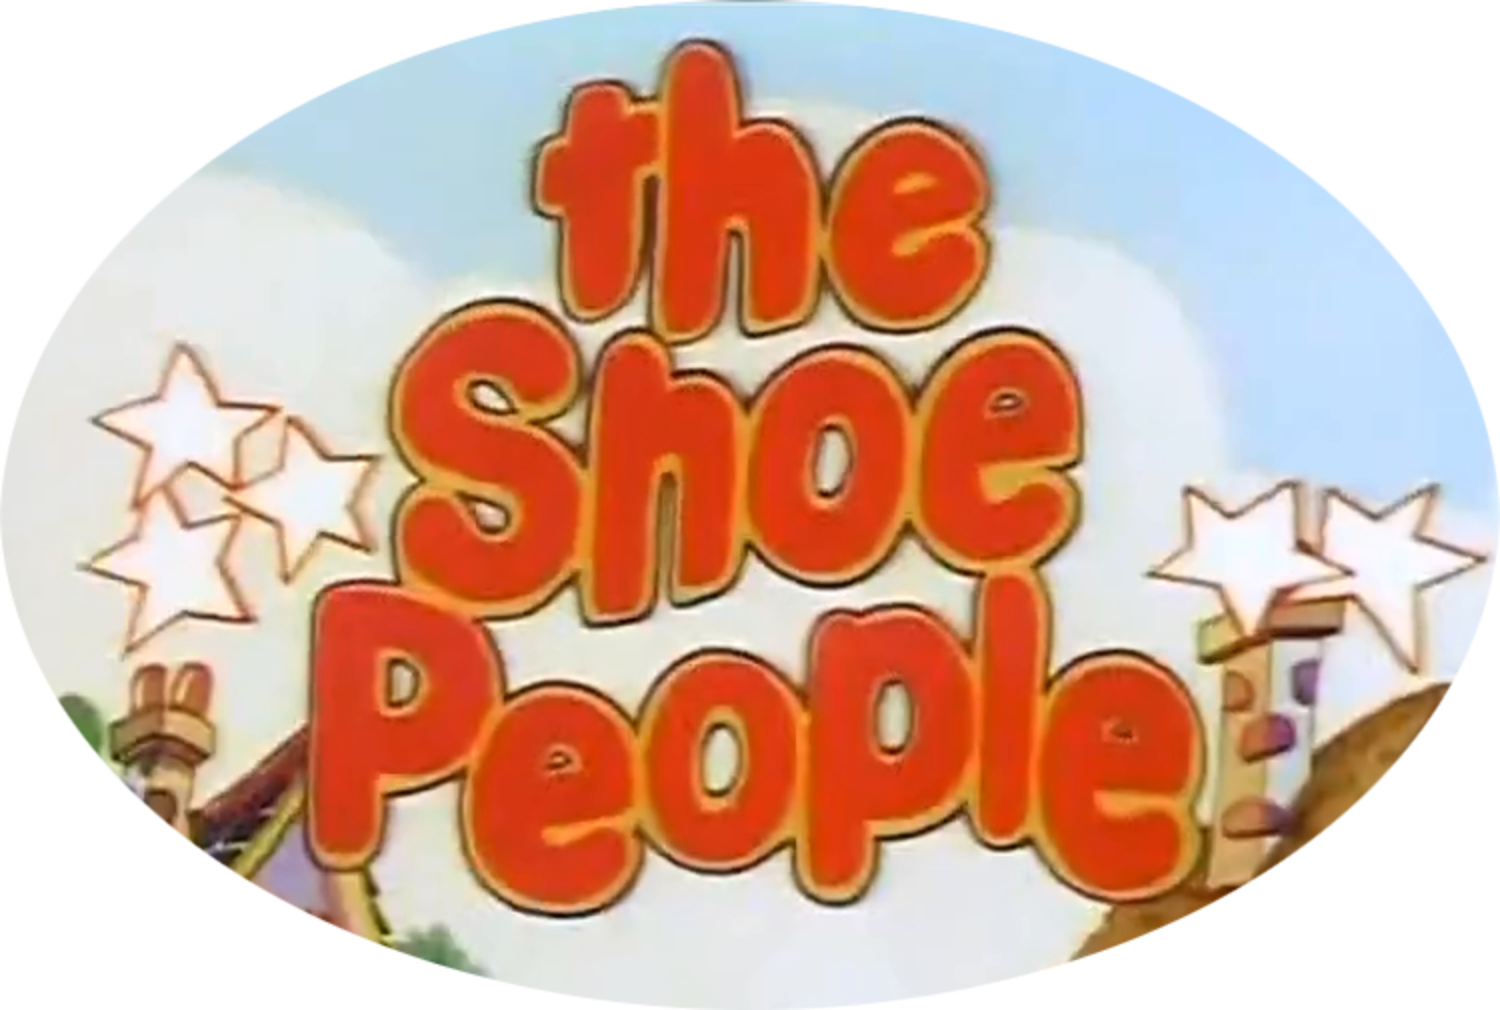 The Shoe People (6 DVDs Box Set)